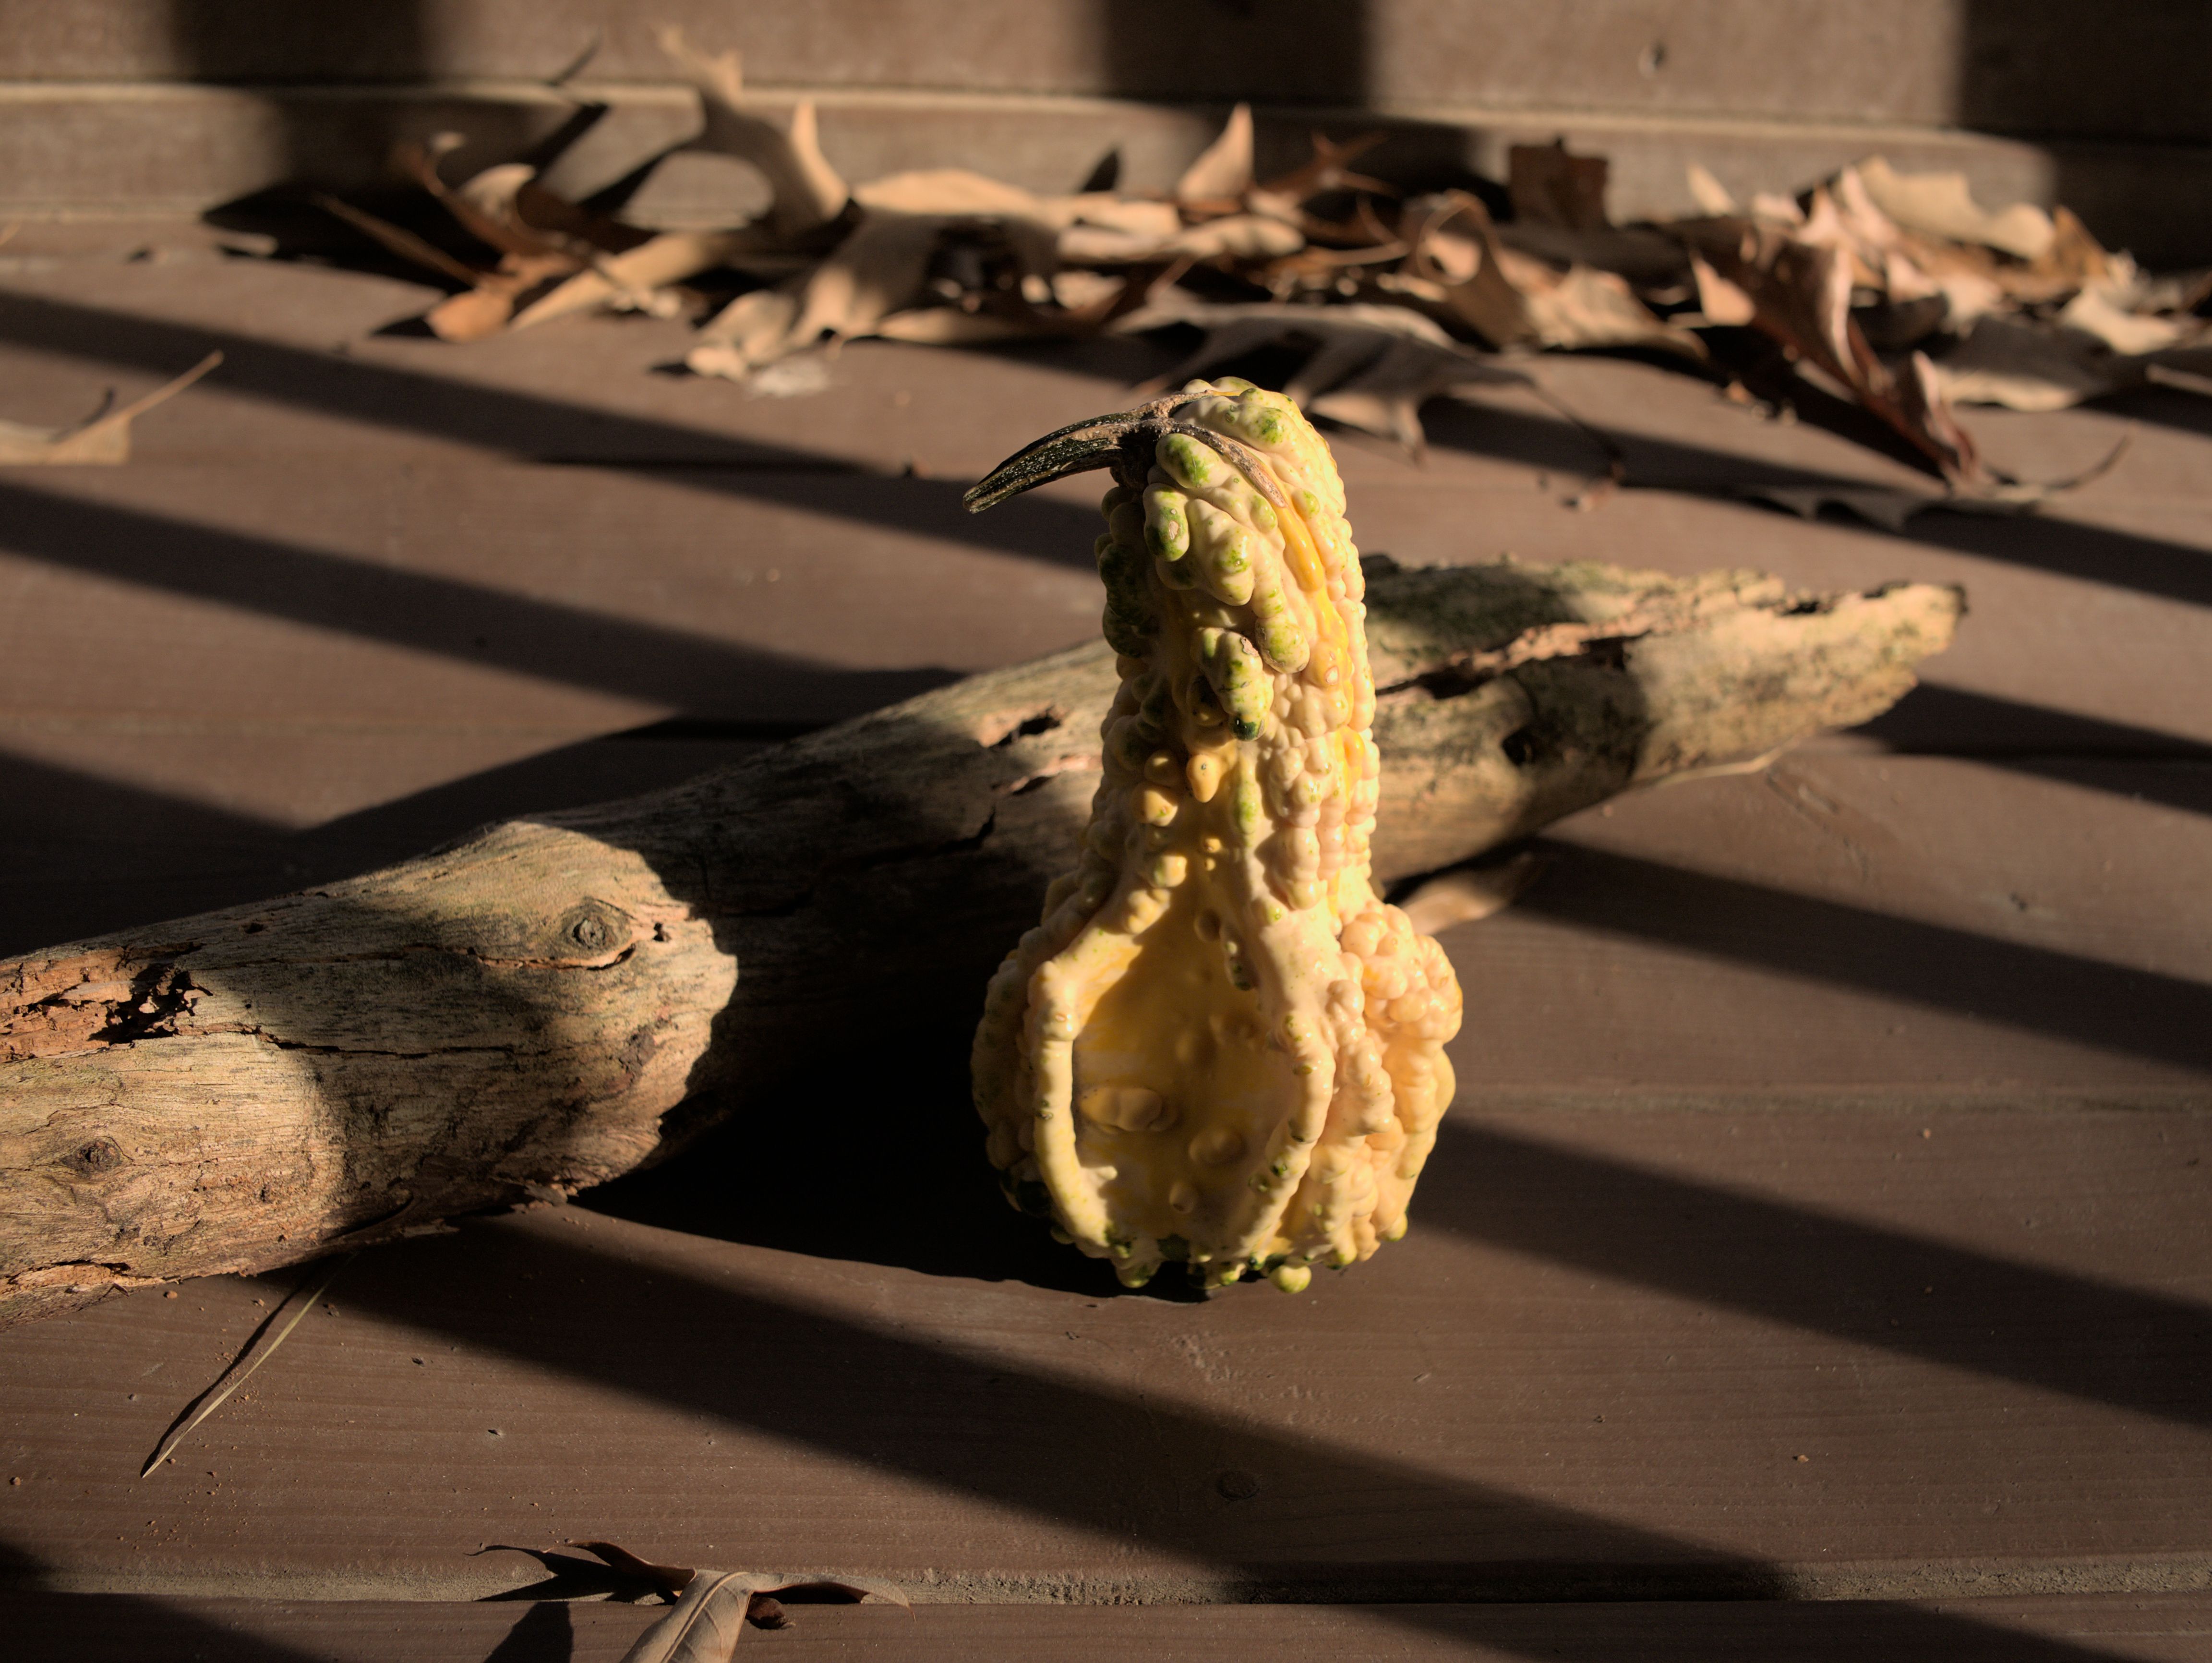 A RAW image of a gourd next to a stick.